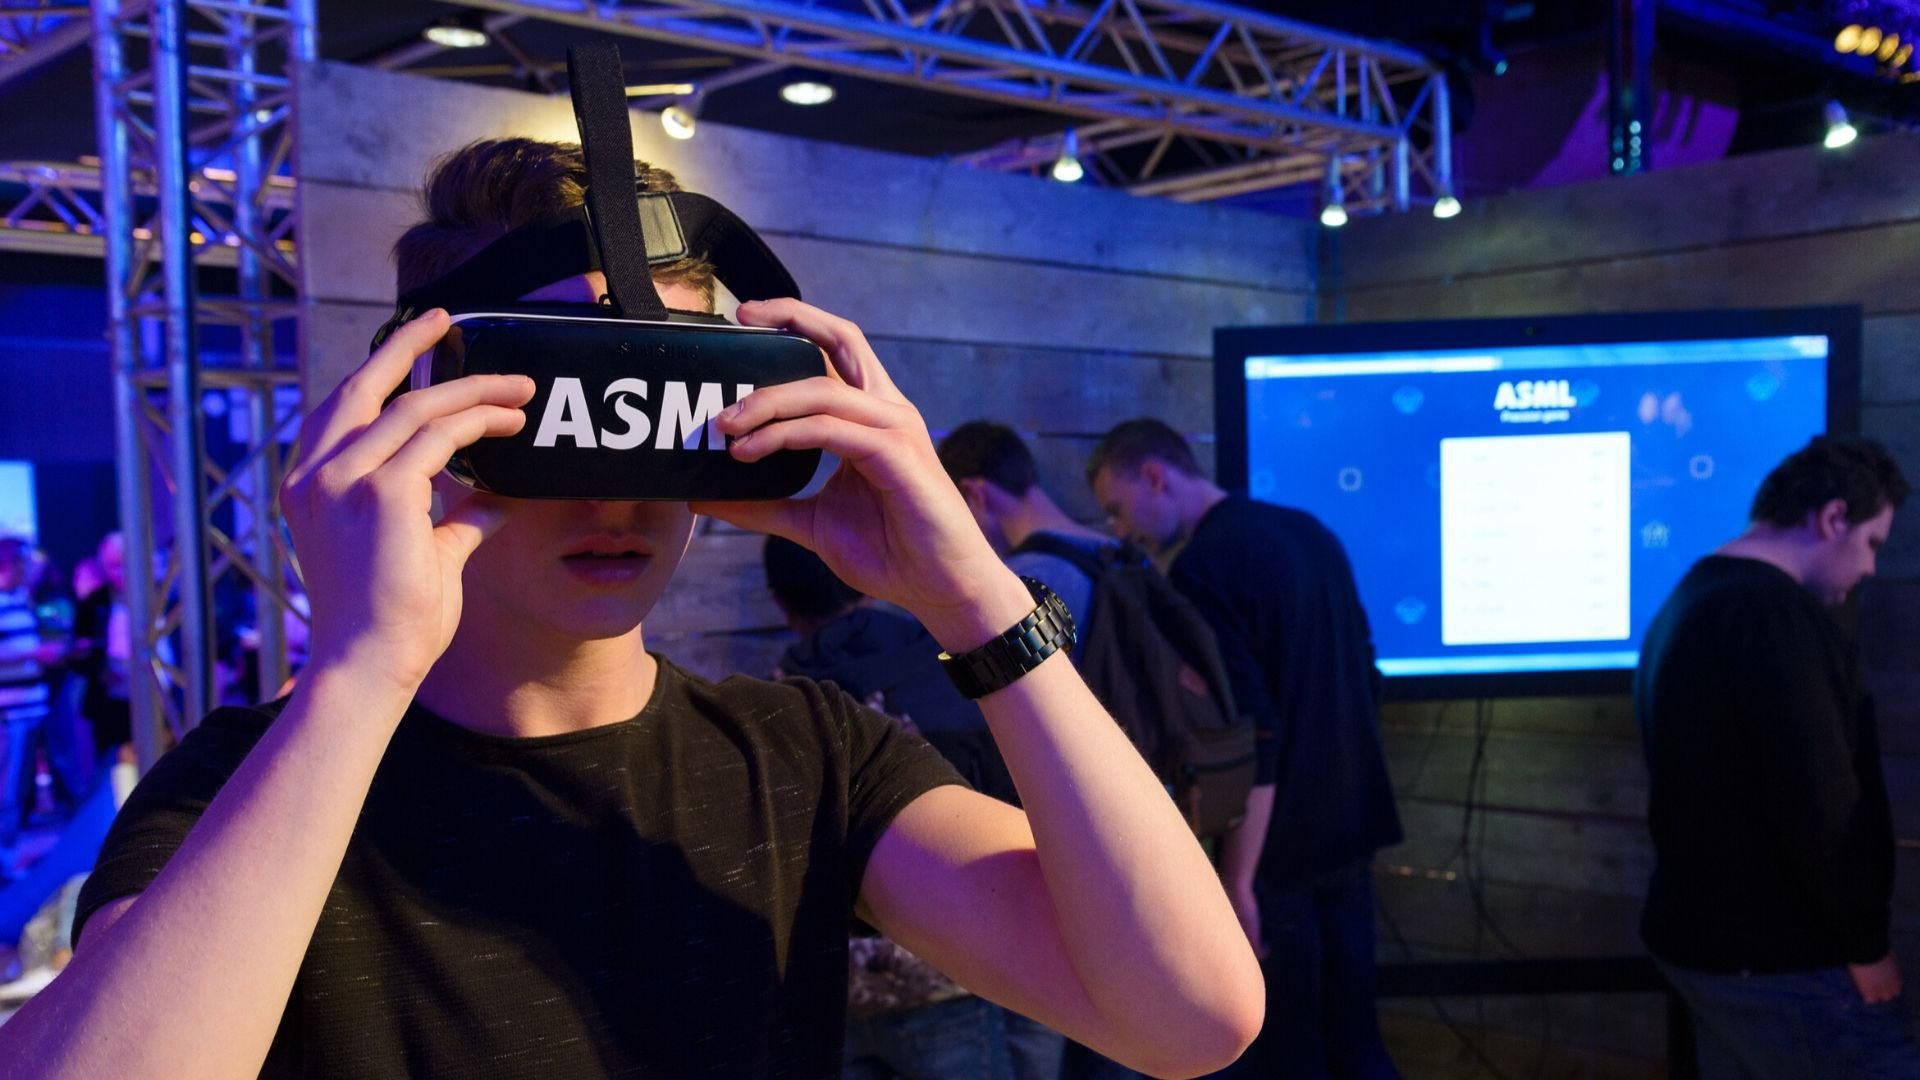 A teenager explores the world of VR with ASML at the Night of the Nerds